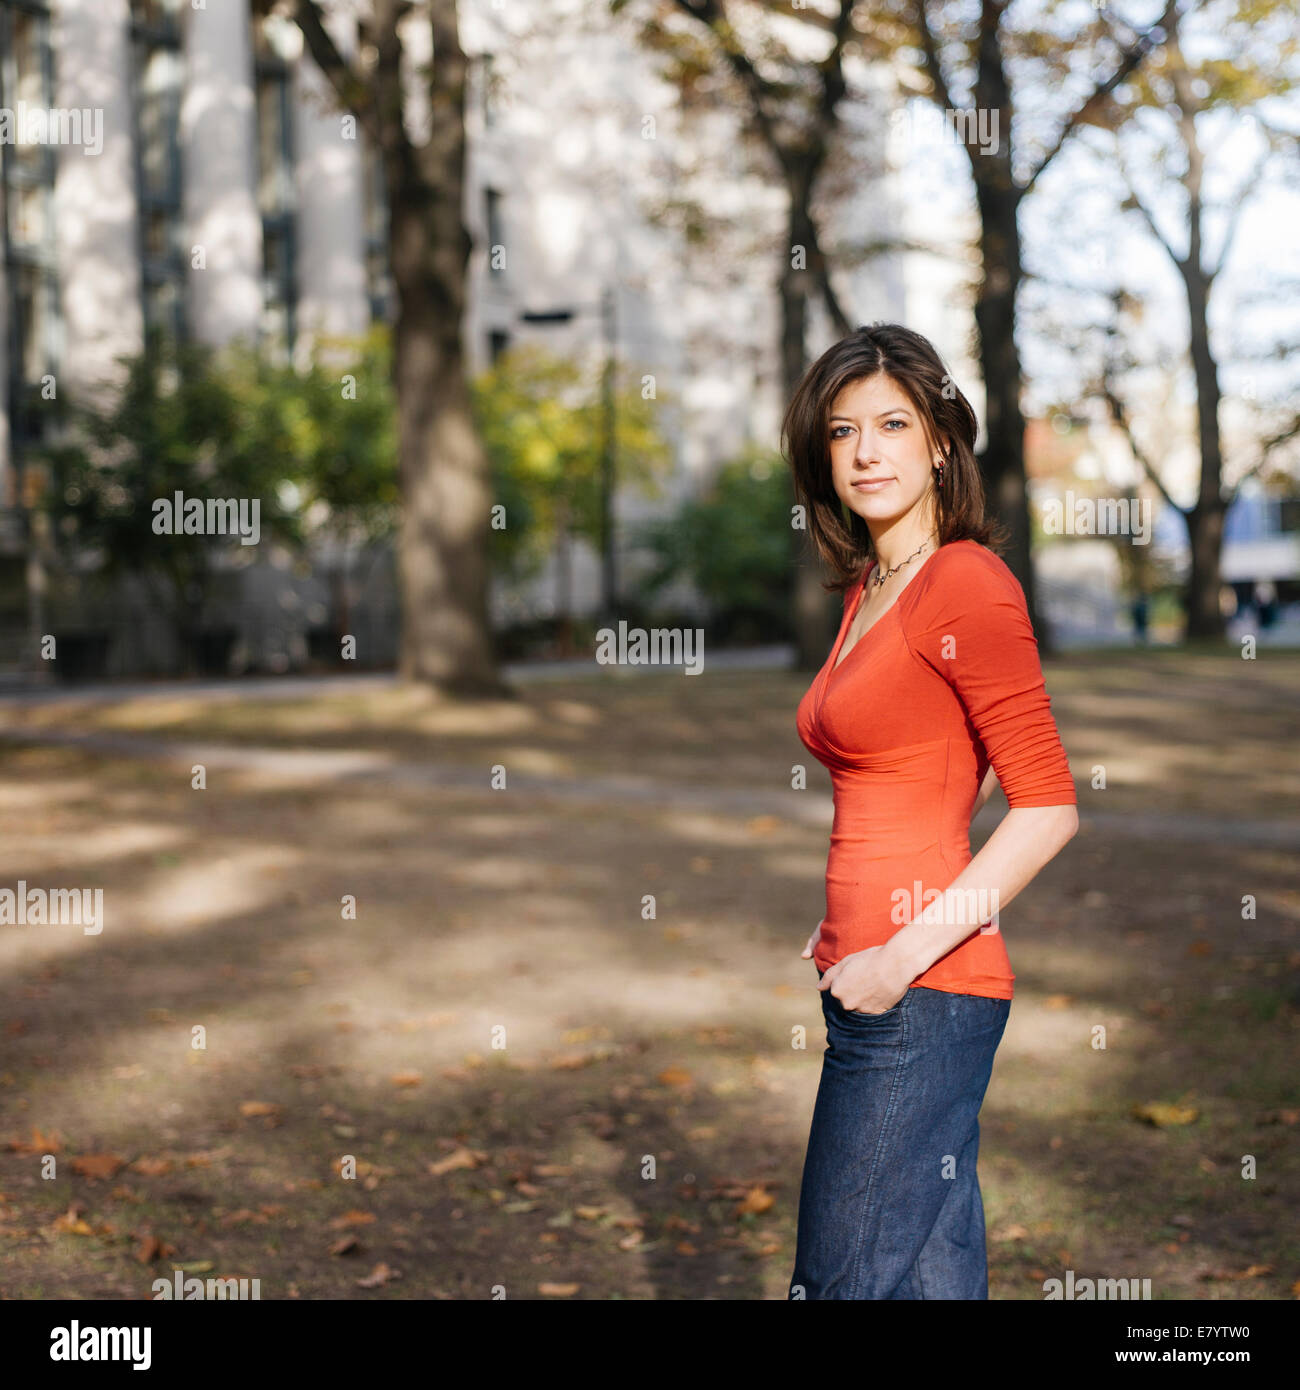 Young woman in park Banque D'Images